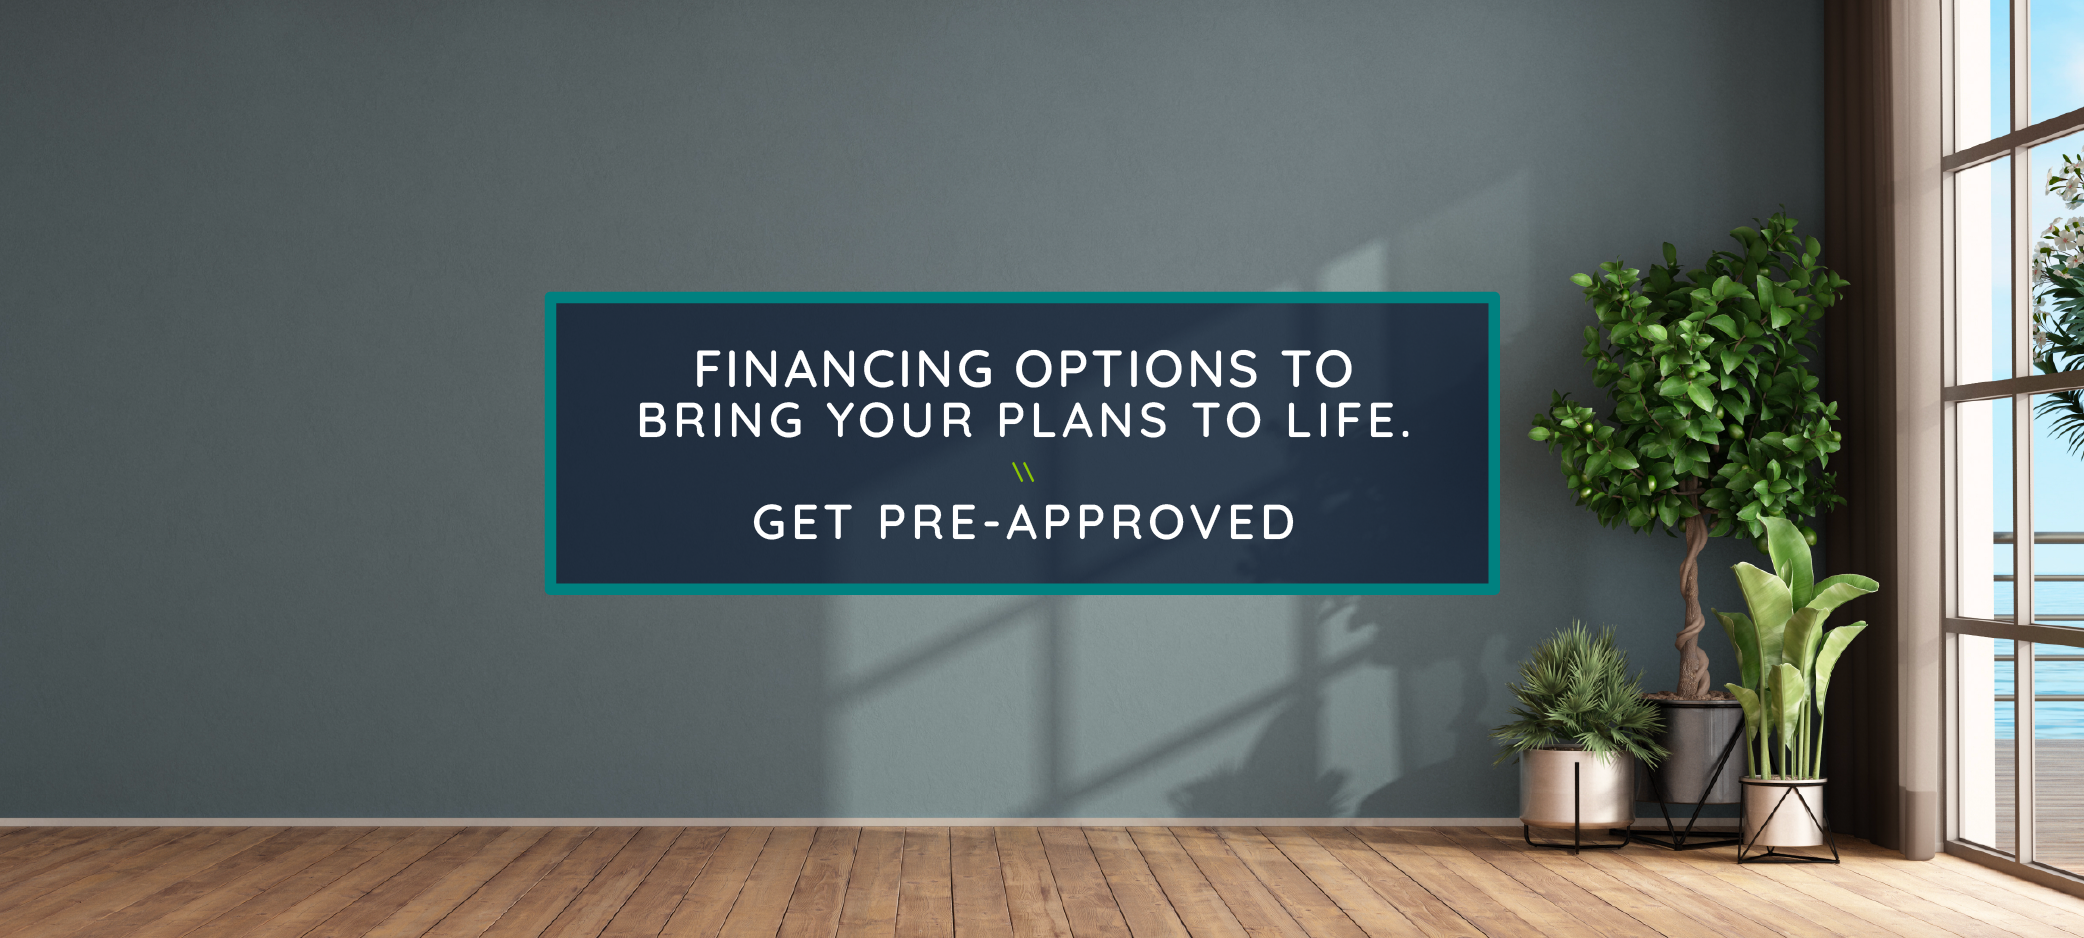 Financing options to bring your plans to life.